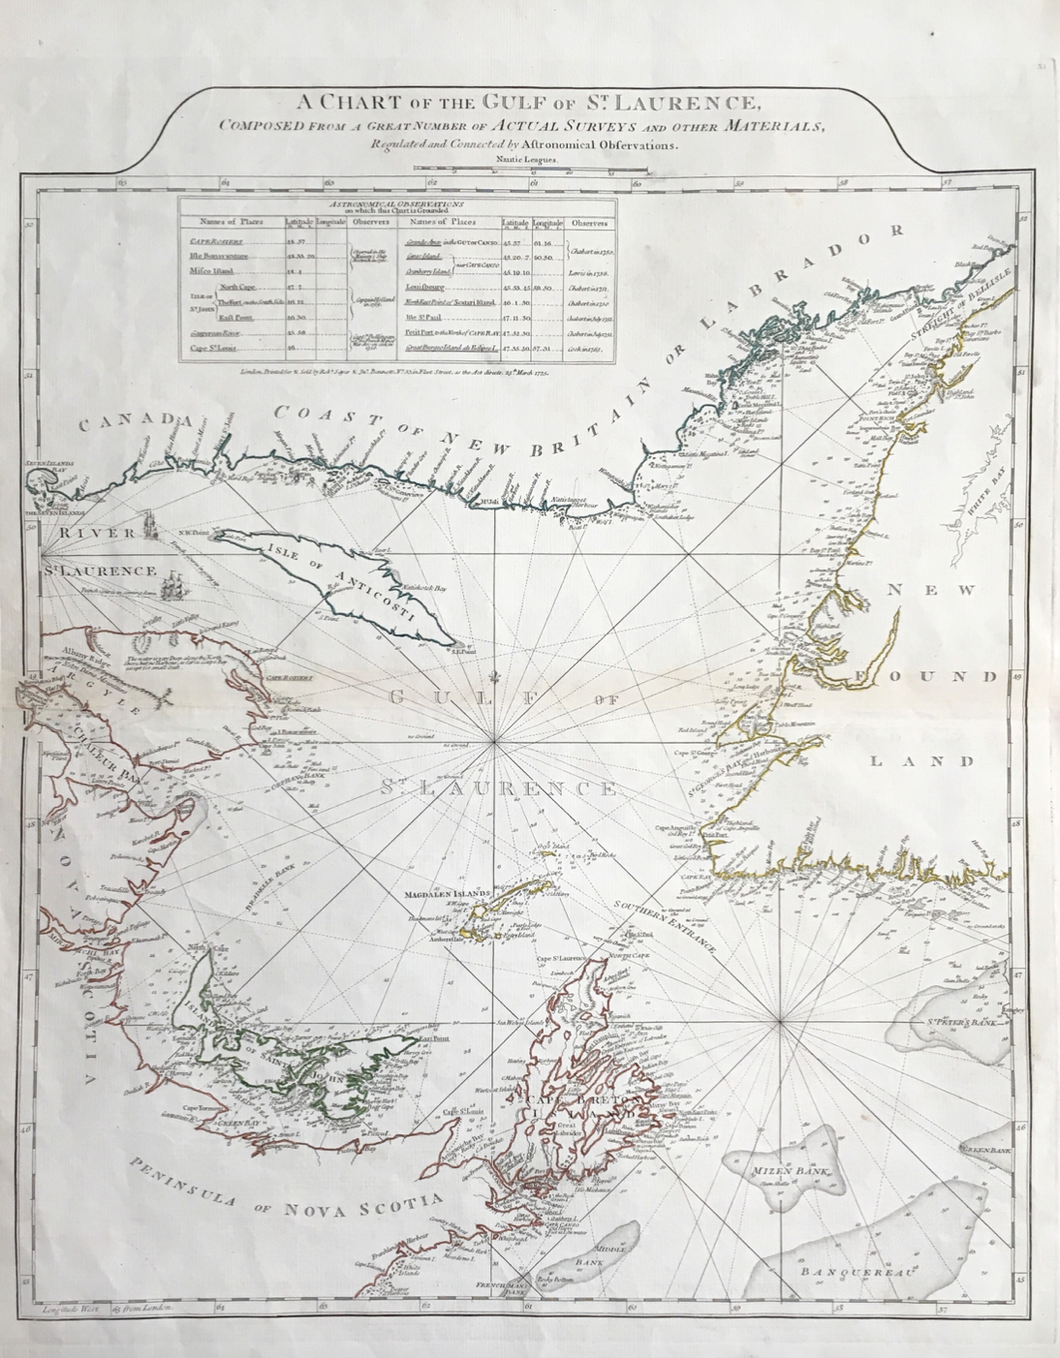 British Admiralty “A Chart of the Gulf of St. Laurence . . . by Astronomical Observations”